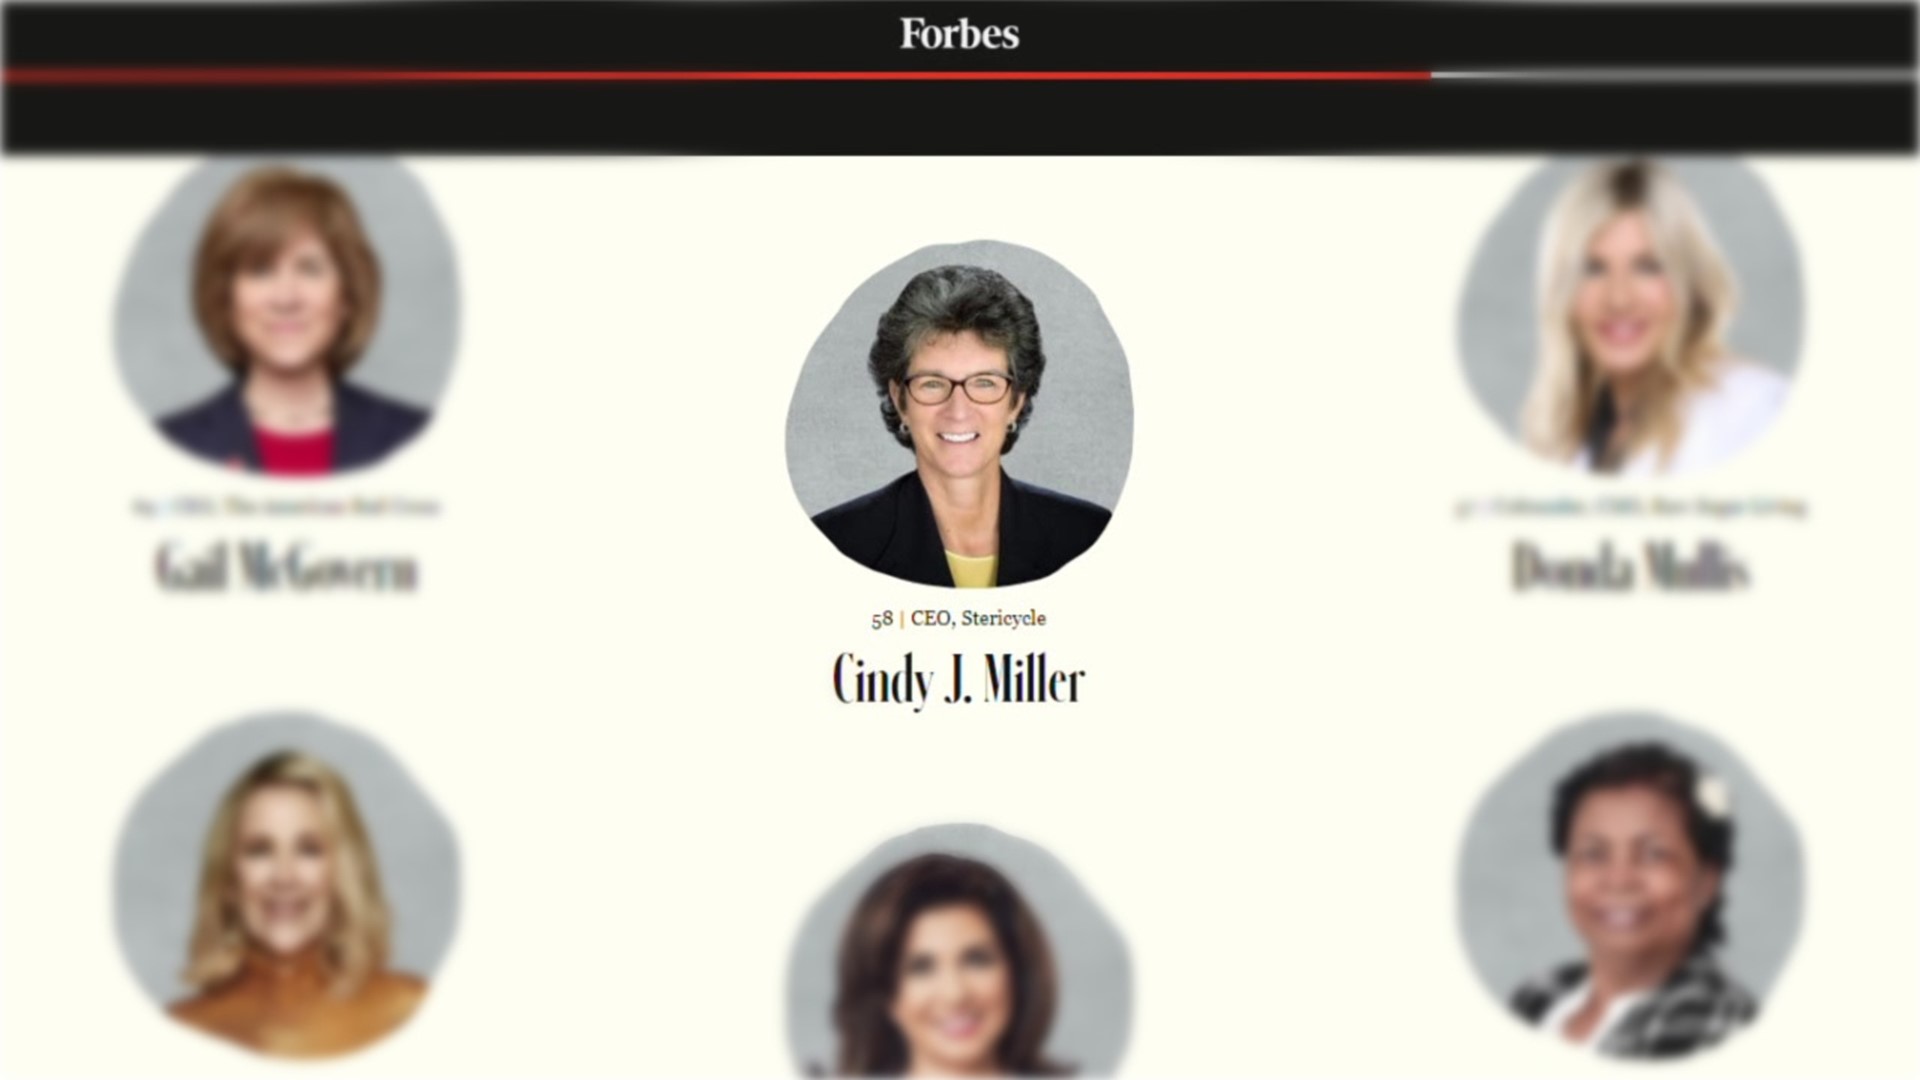 A prestigious national magazine is recognizing a businesswoman who grew up in Schuylkill County.
The CEO was named to the Forbes 50 over 50 list.